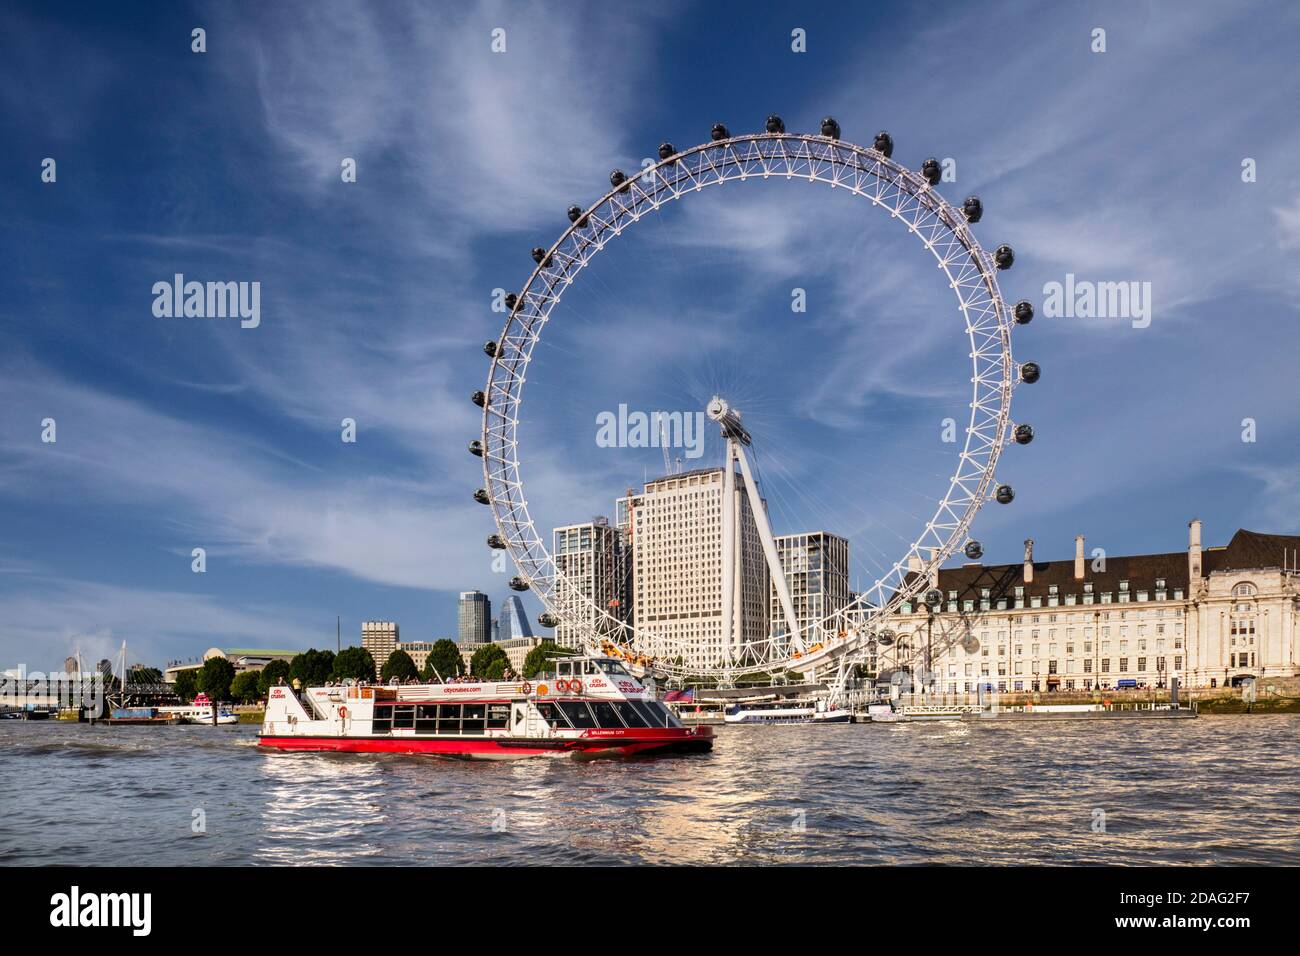 London Eye Boat Cruising City Cruise River Thames tour upstream blue sky with SouthBank, Marriott Hotel County Hall & Shell HQ Westminster London UK Stock Photo